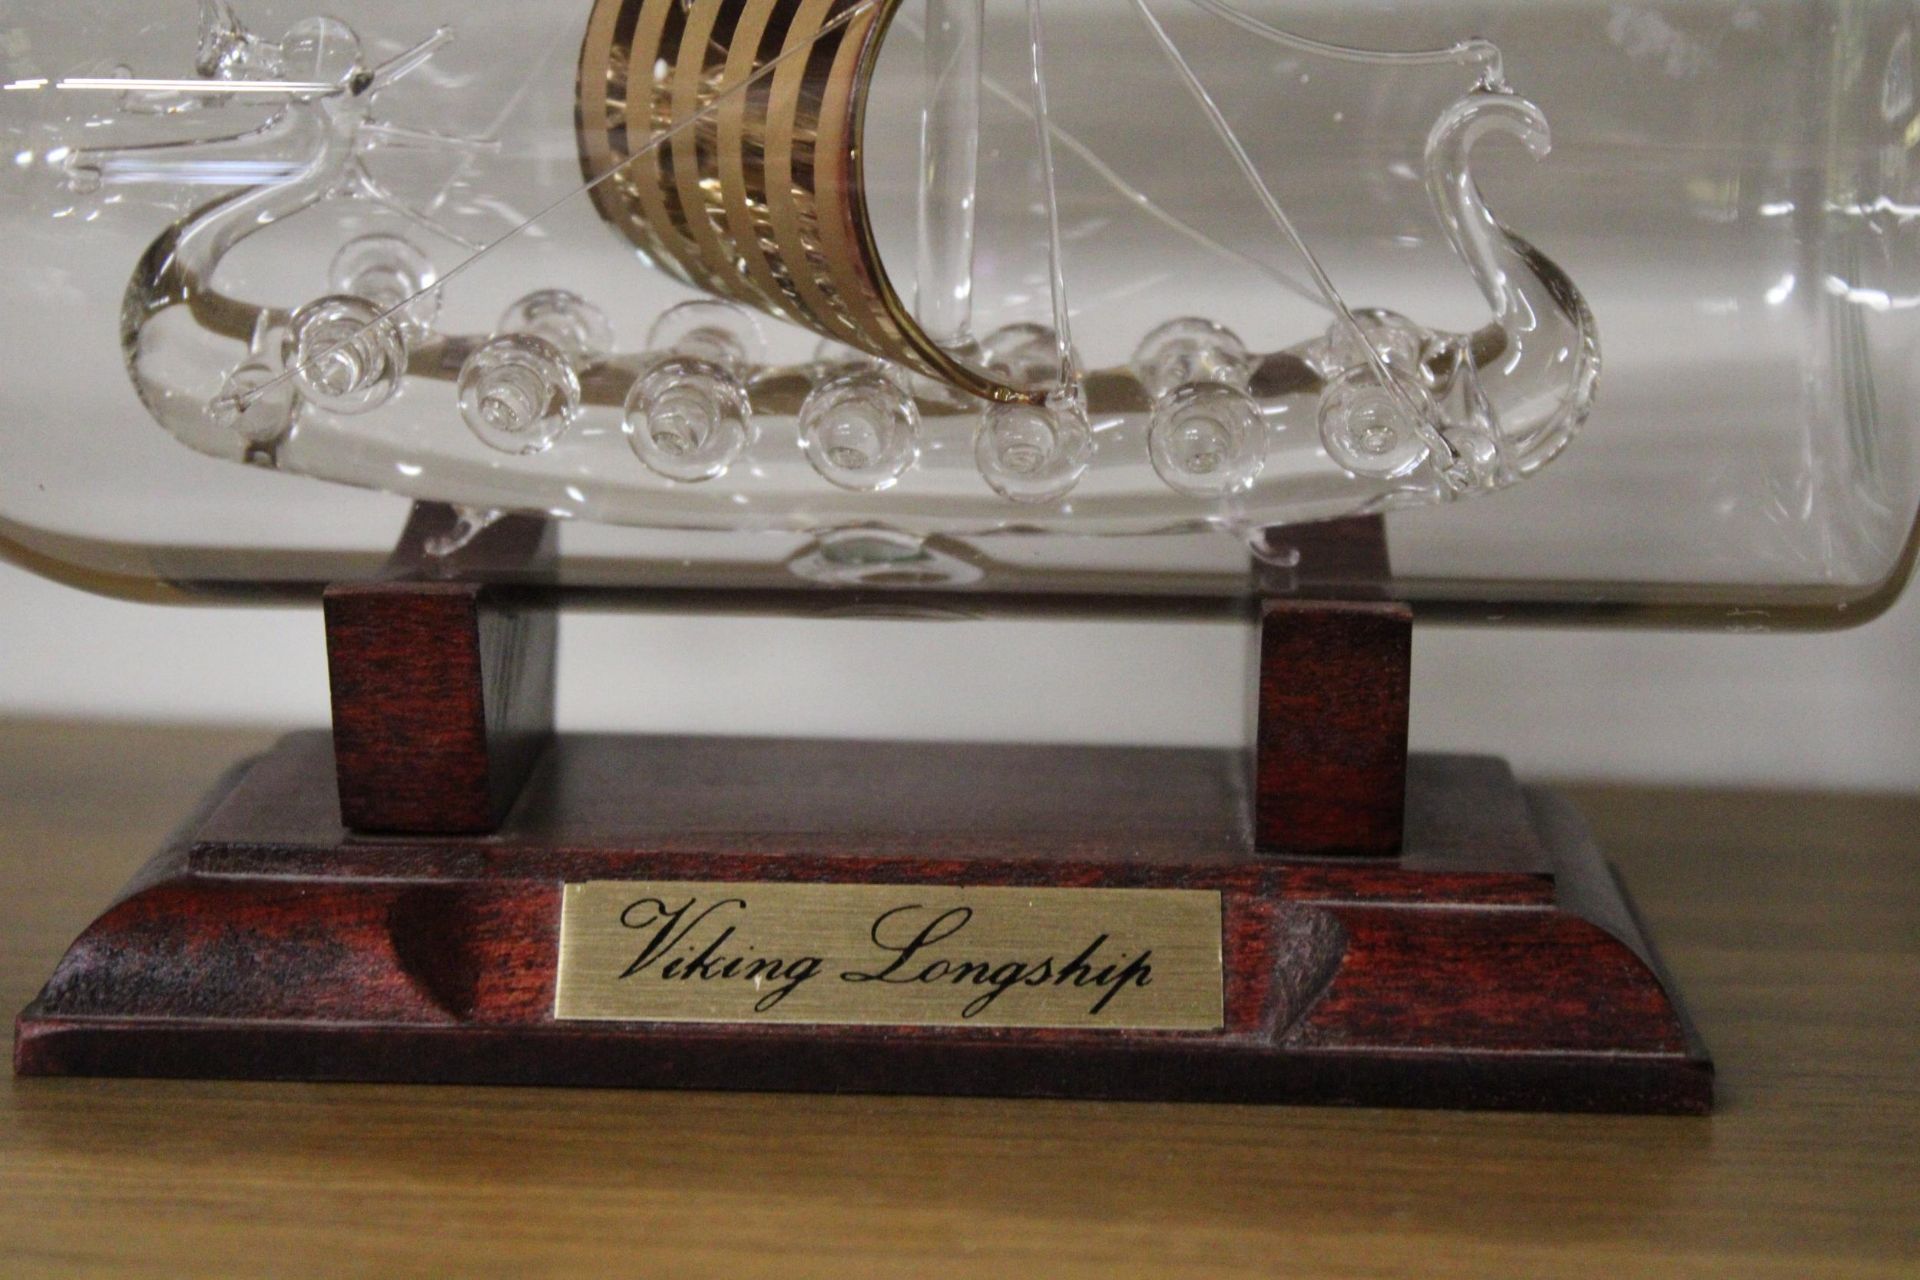 A GLASS MODEL OF A VIKING LONGSHIP IN A BOTTLE - Image 3 of 5